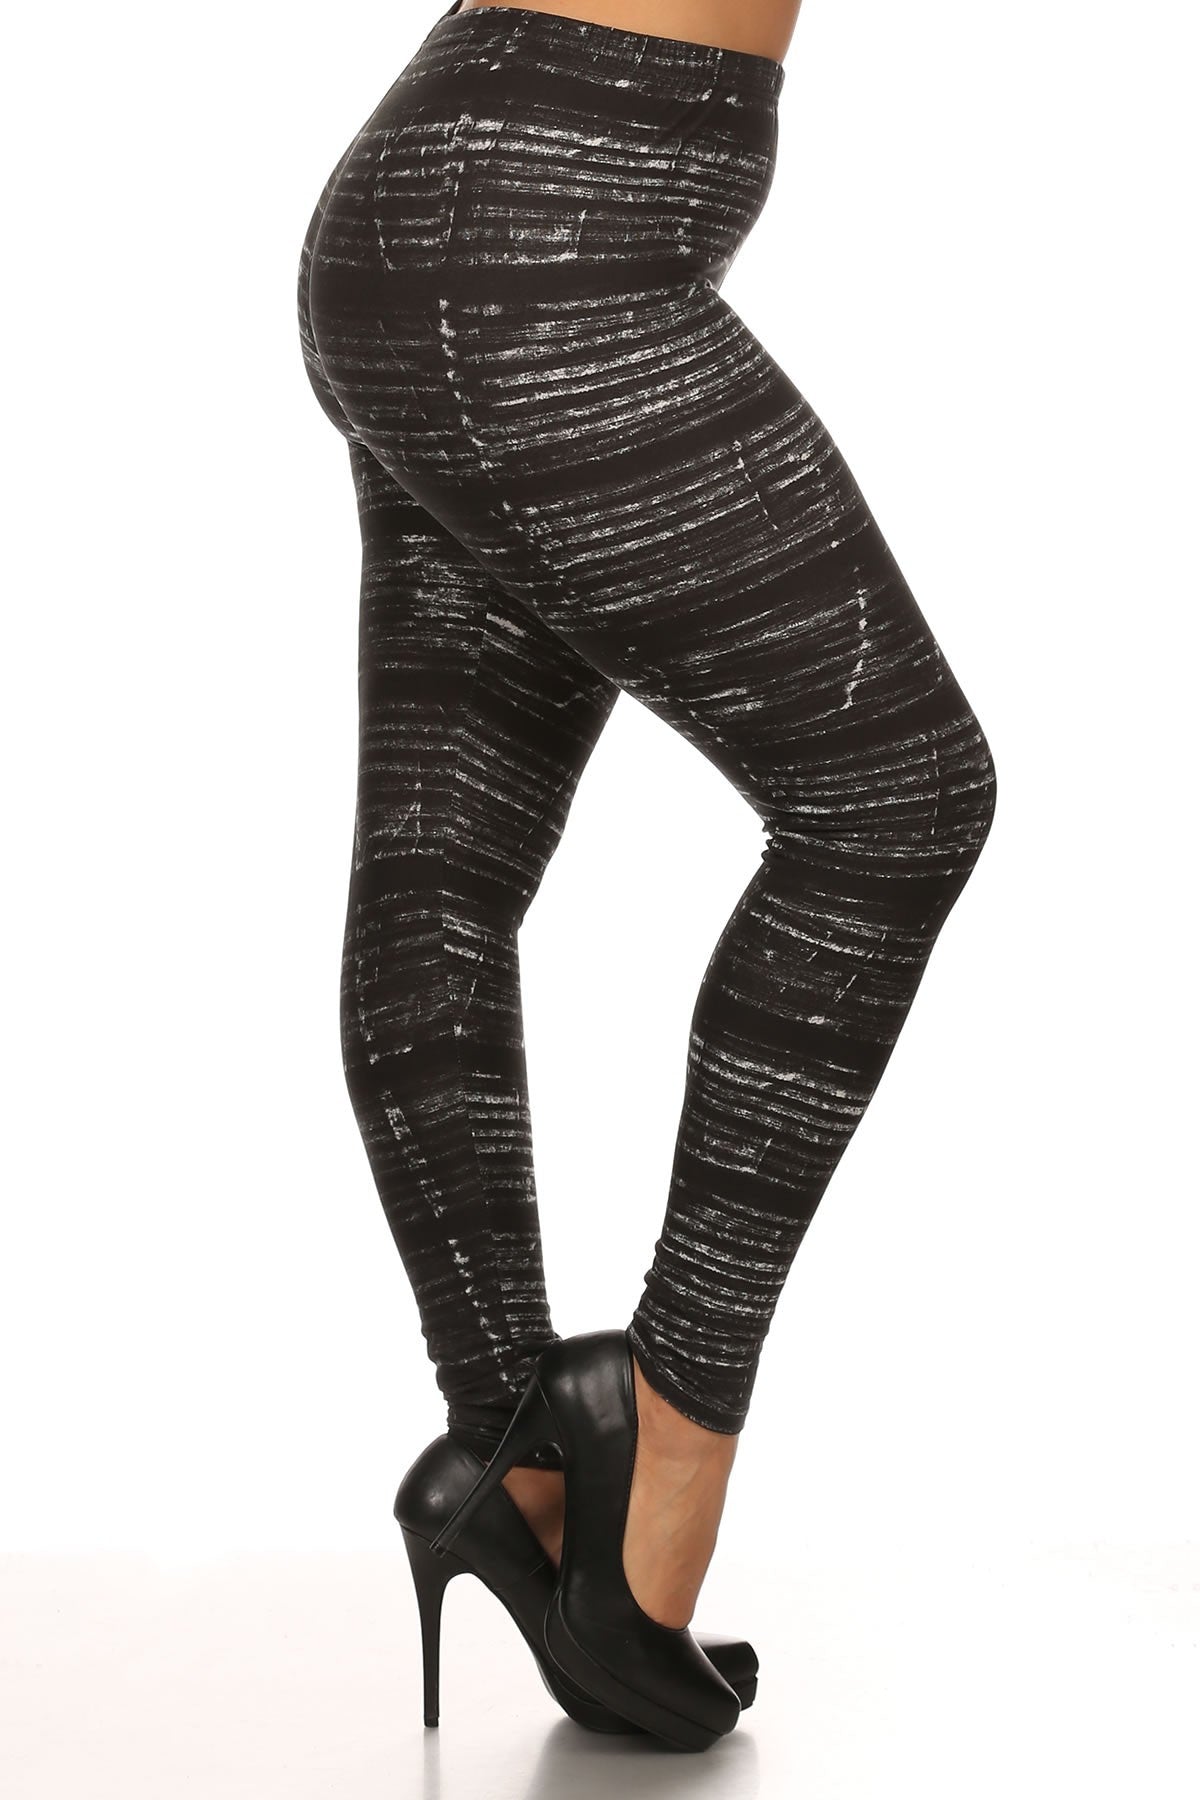 Plus Tie Dye Print, Full Length Leggings In A Fitted Style With A Banded High Waist.